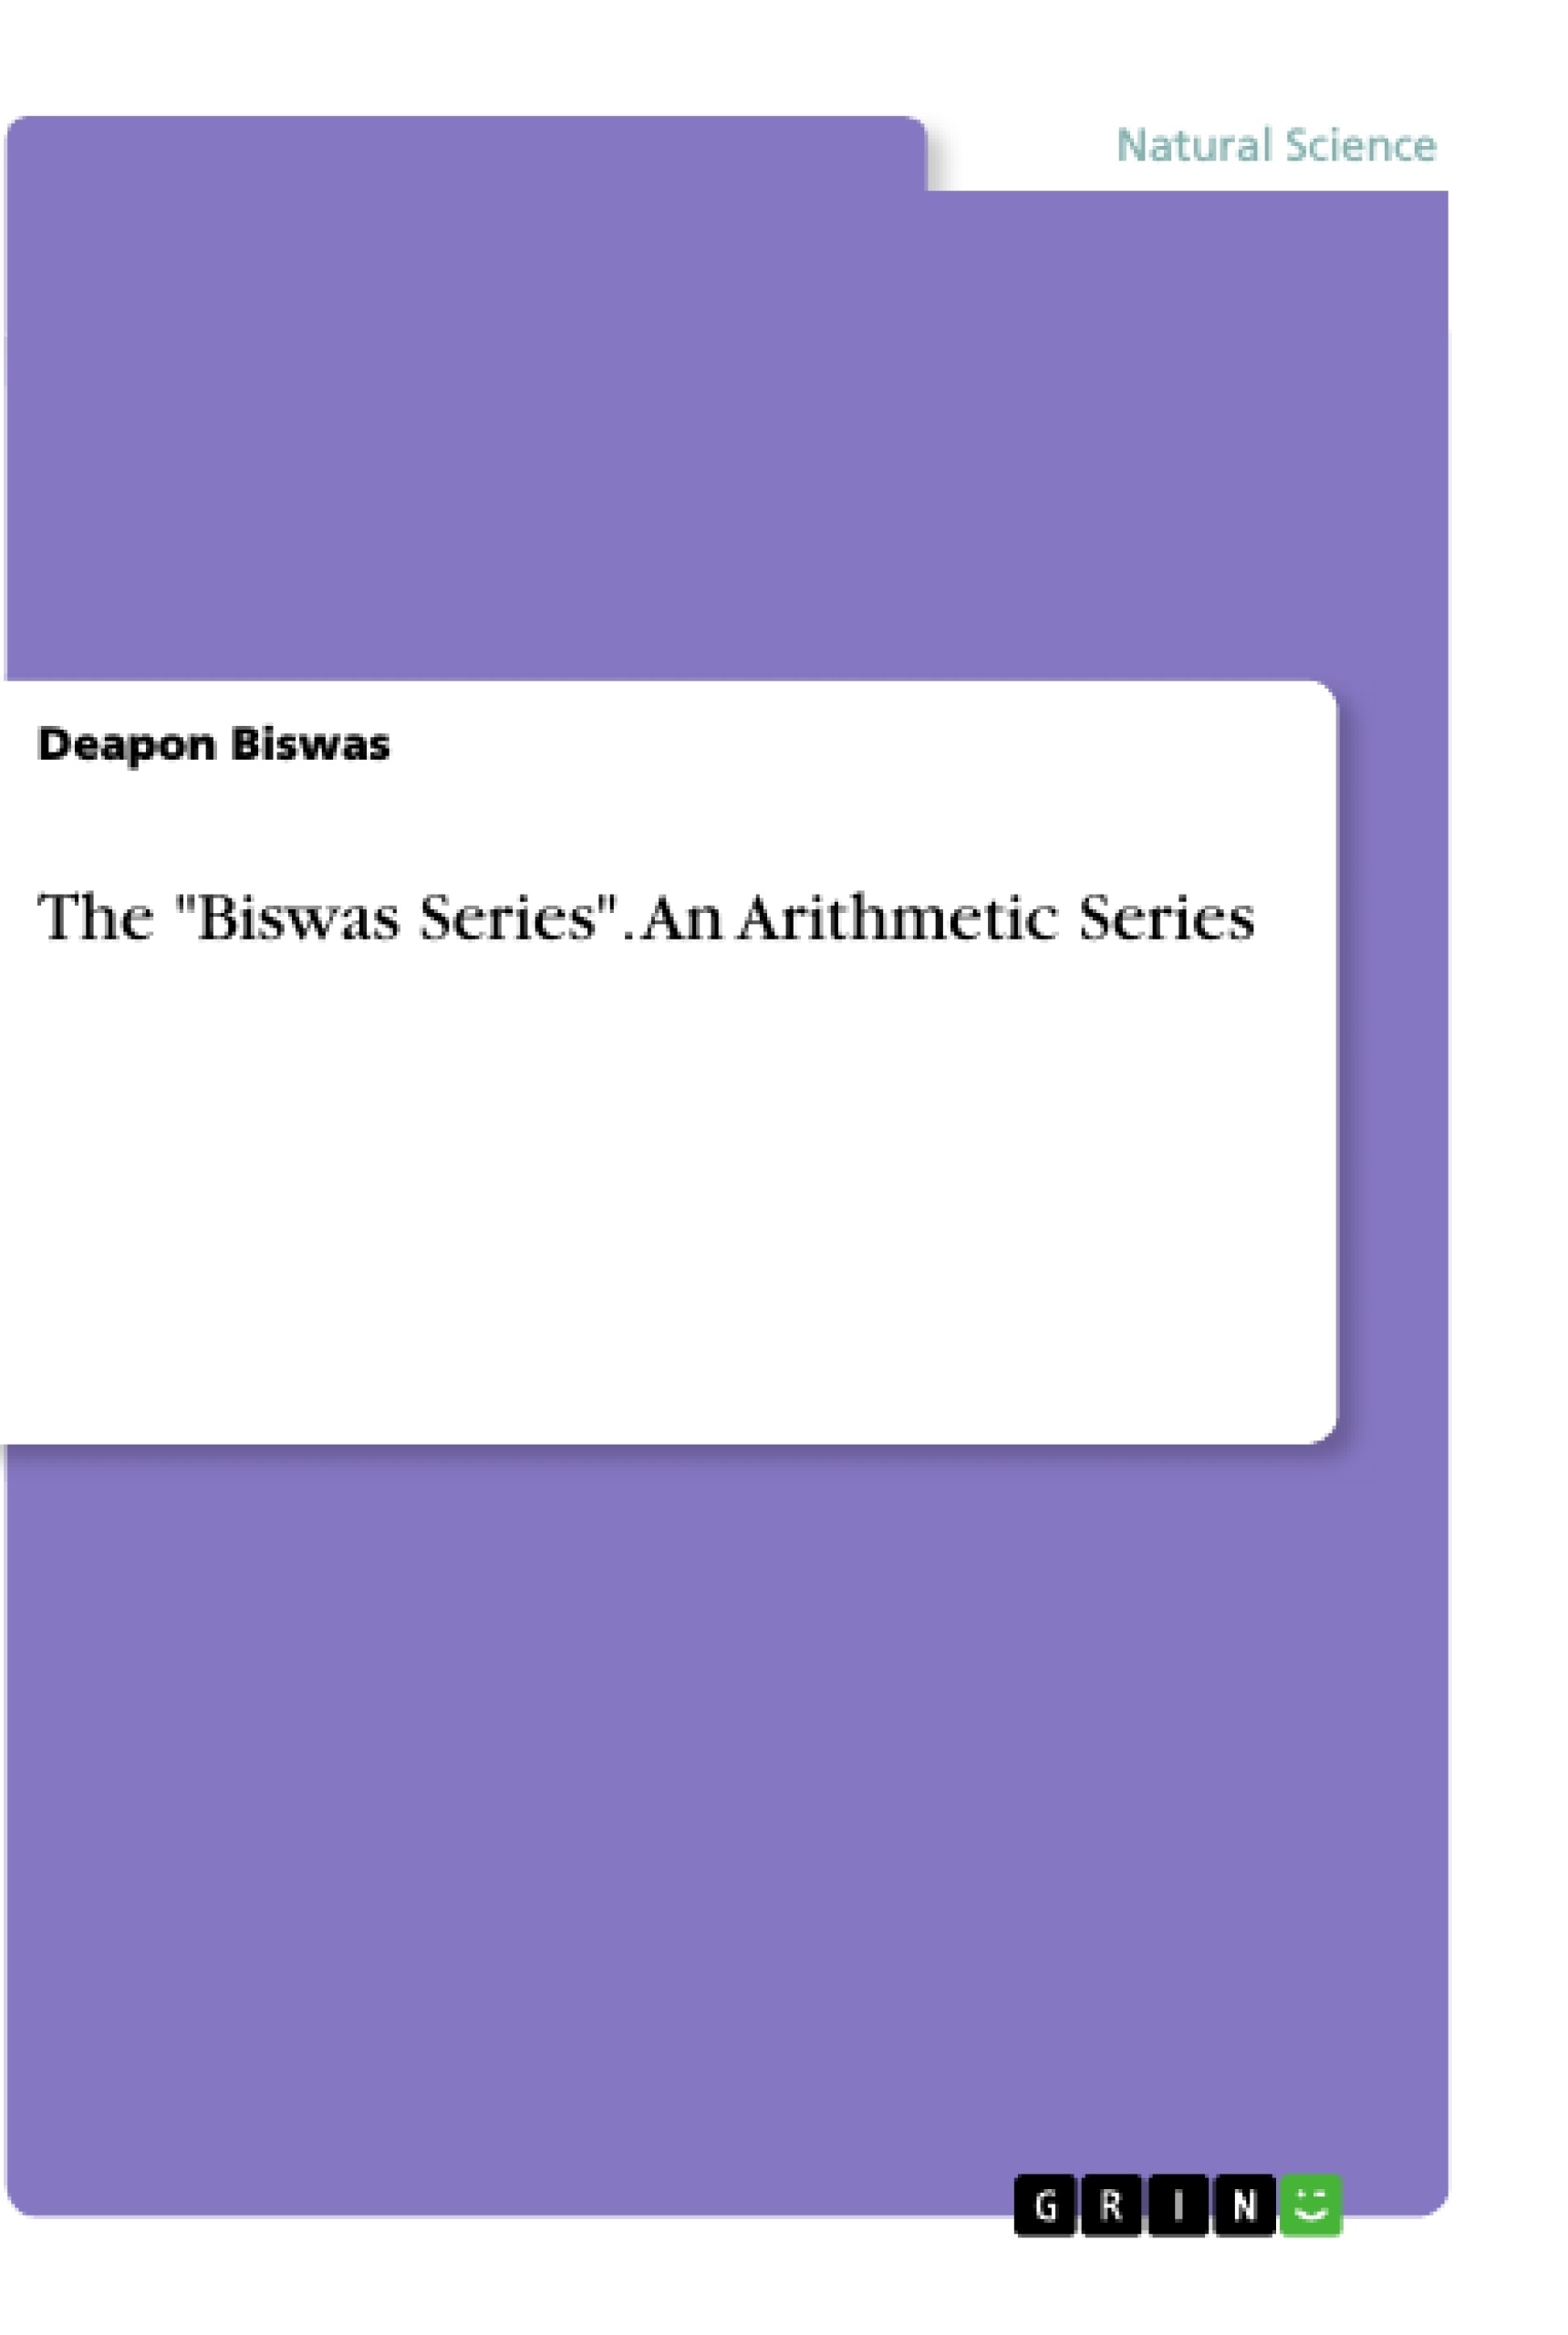 Title: The "Biswas Series". An Arithmetic Series